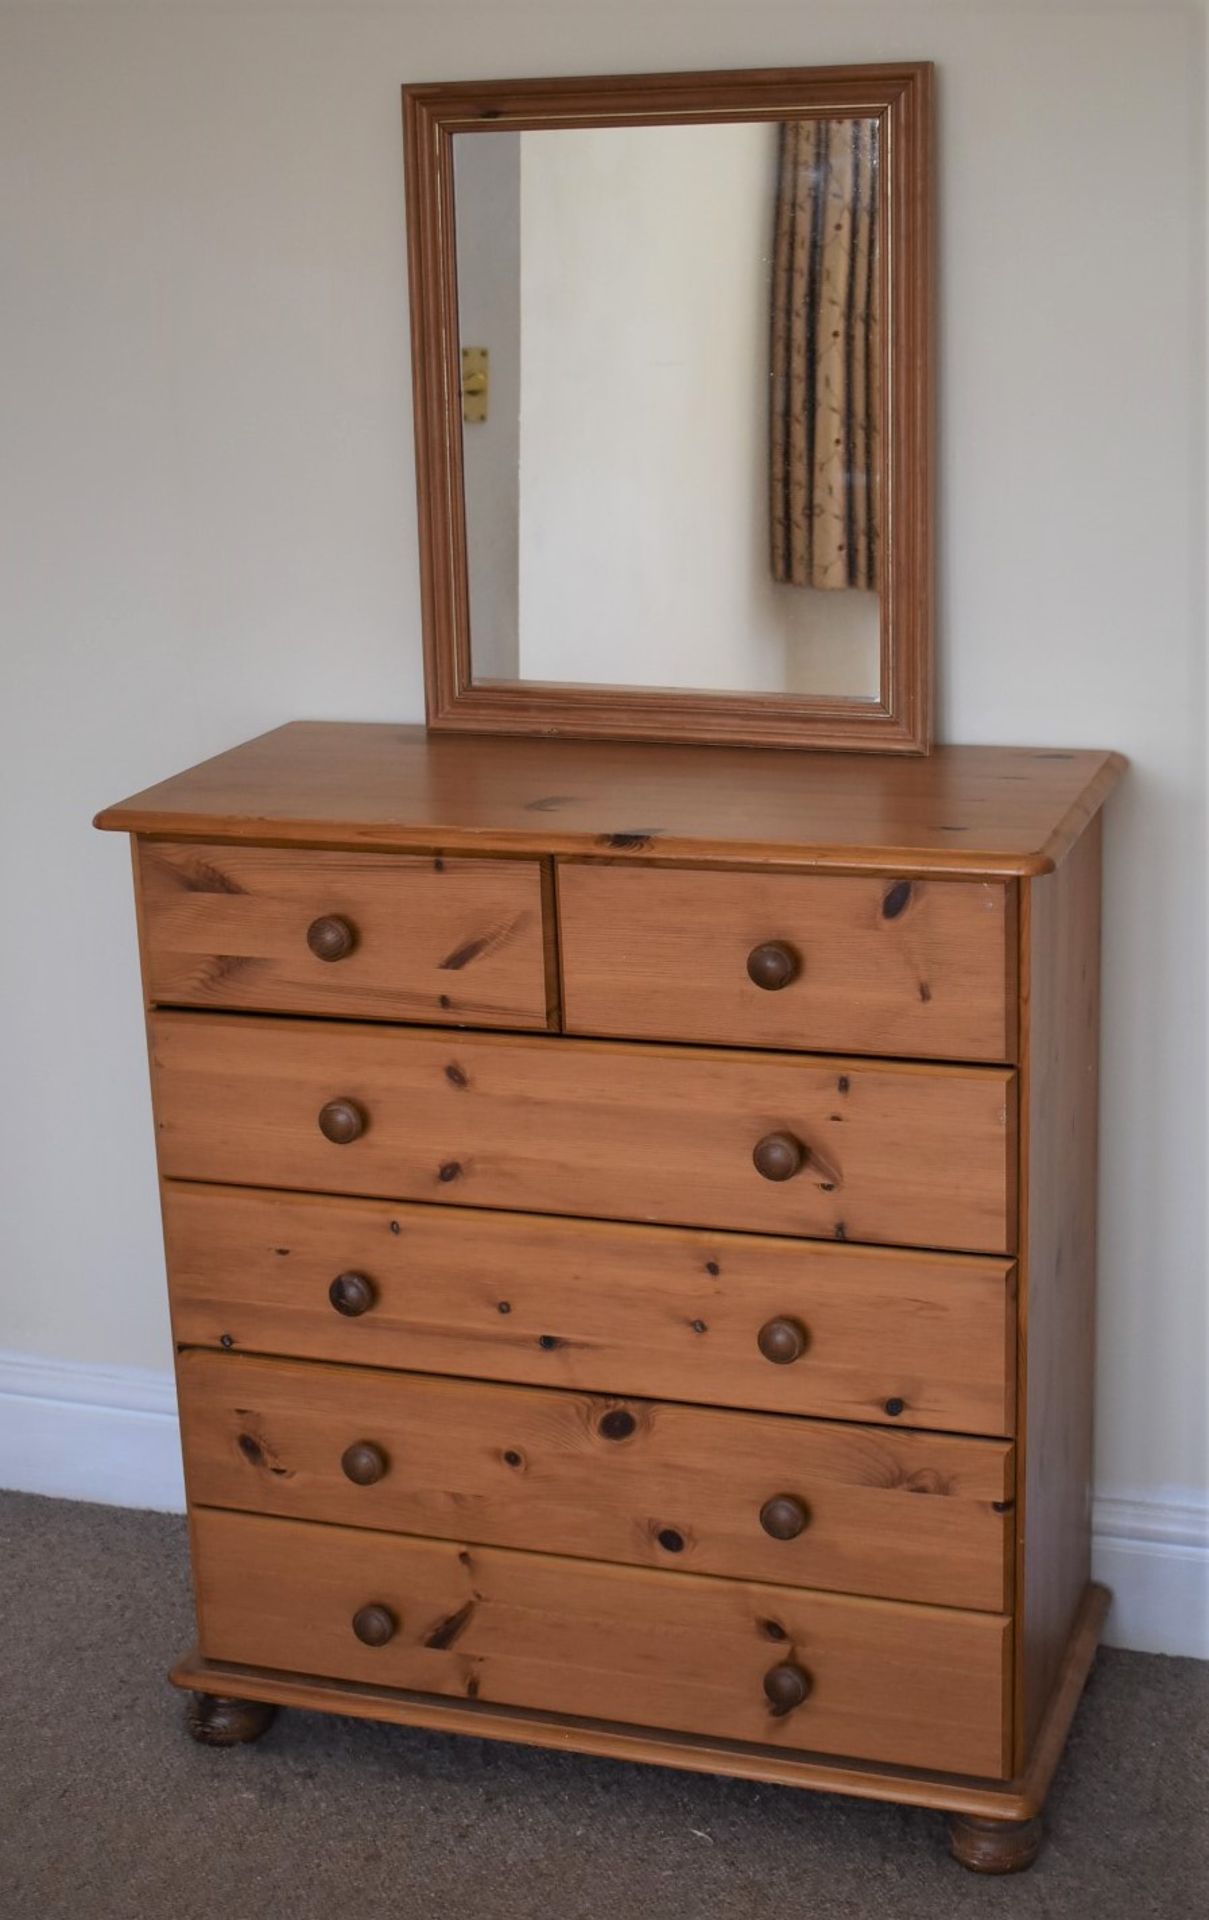 1 x Pine Chest of Bedroom Drawers With Matching Mirror -  No VAT On The Hammer - CL999 - Location: